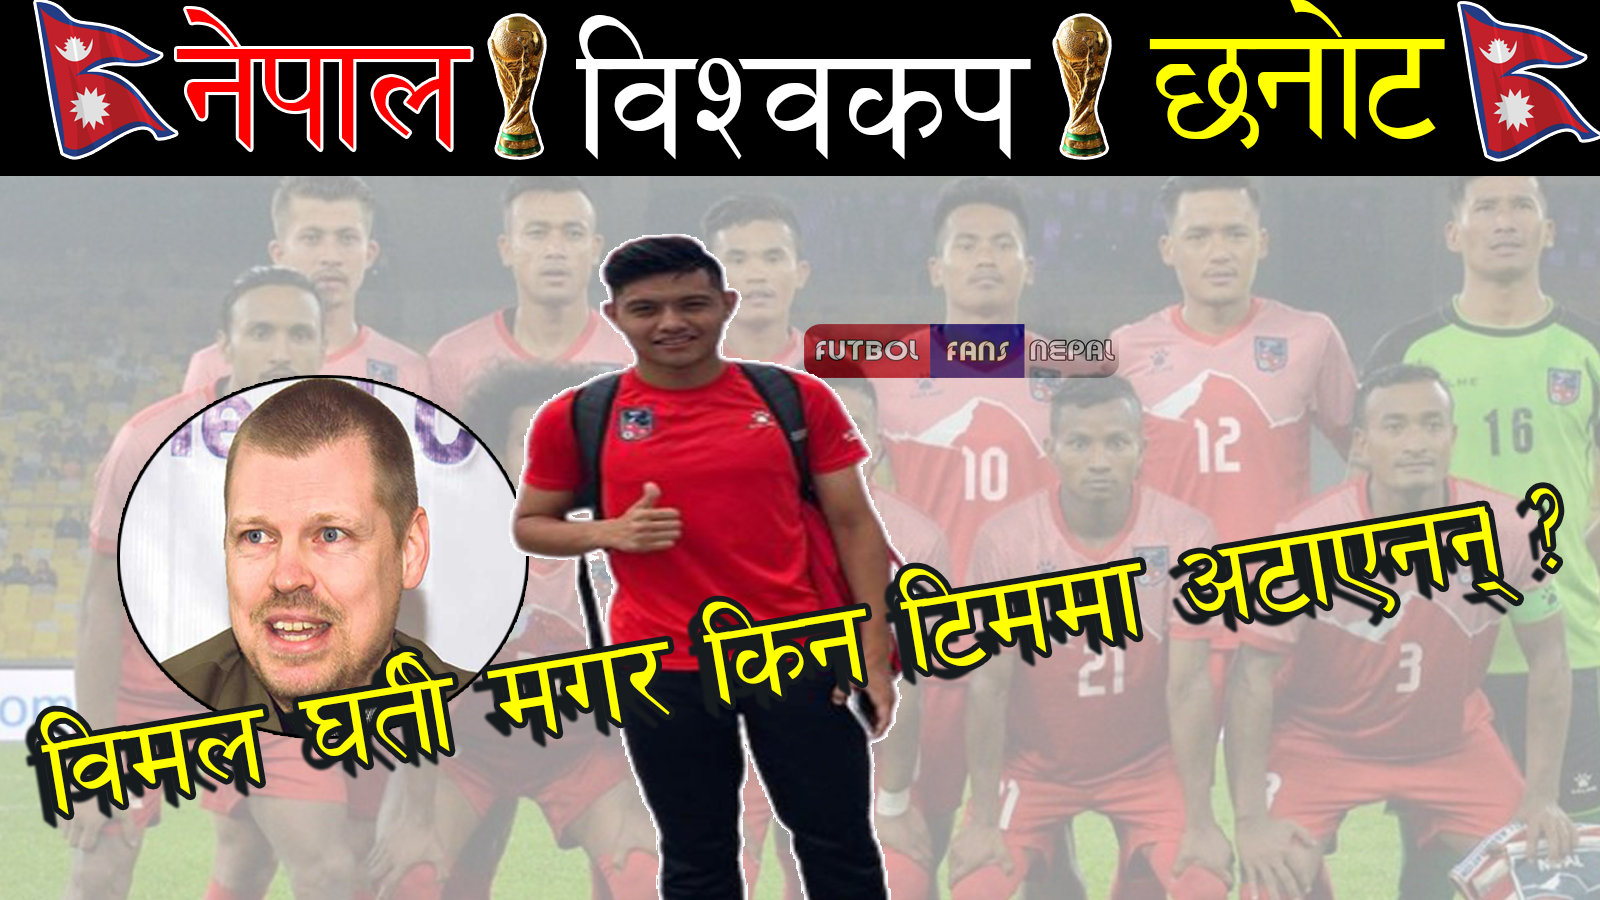 Why Bimal Gahrti Magar not included in the Team?